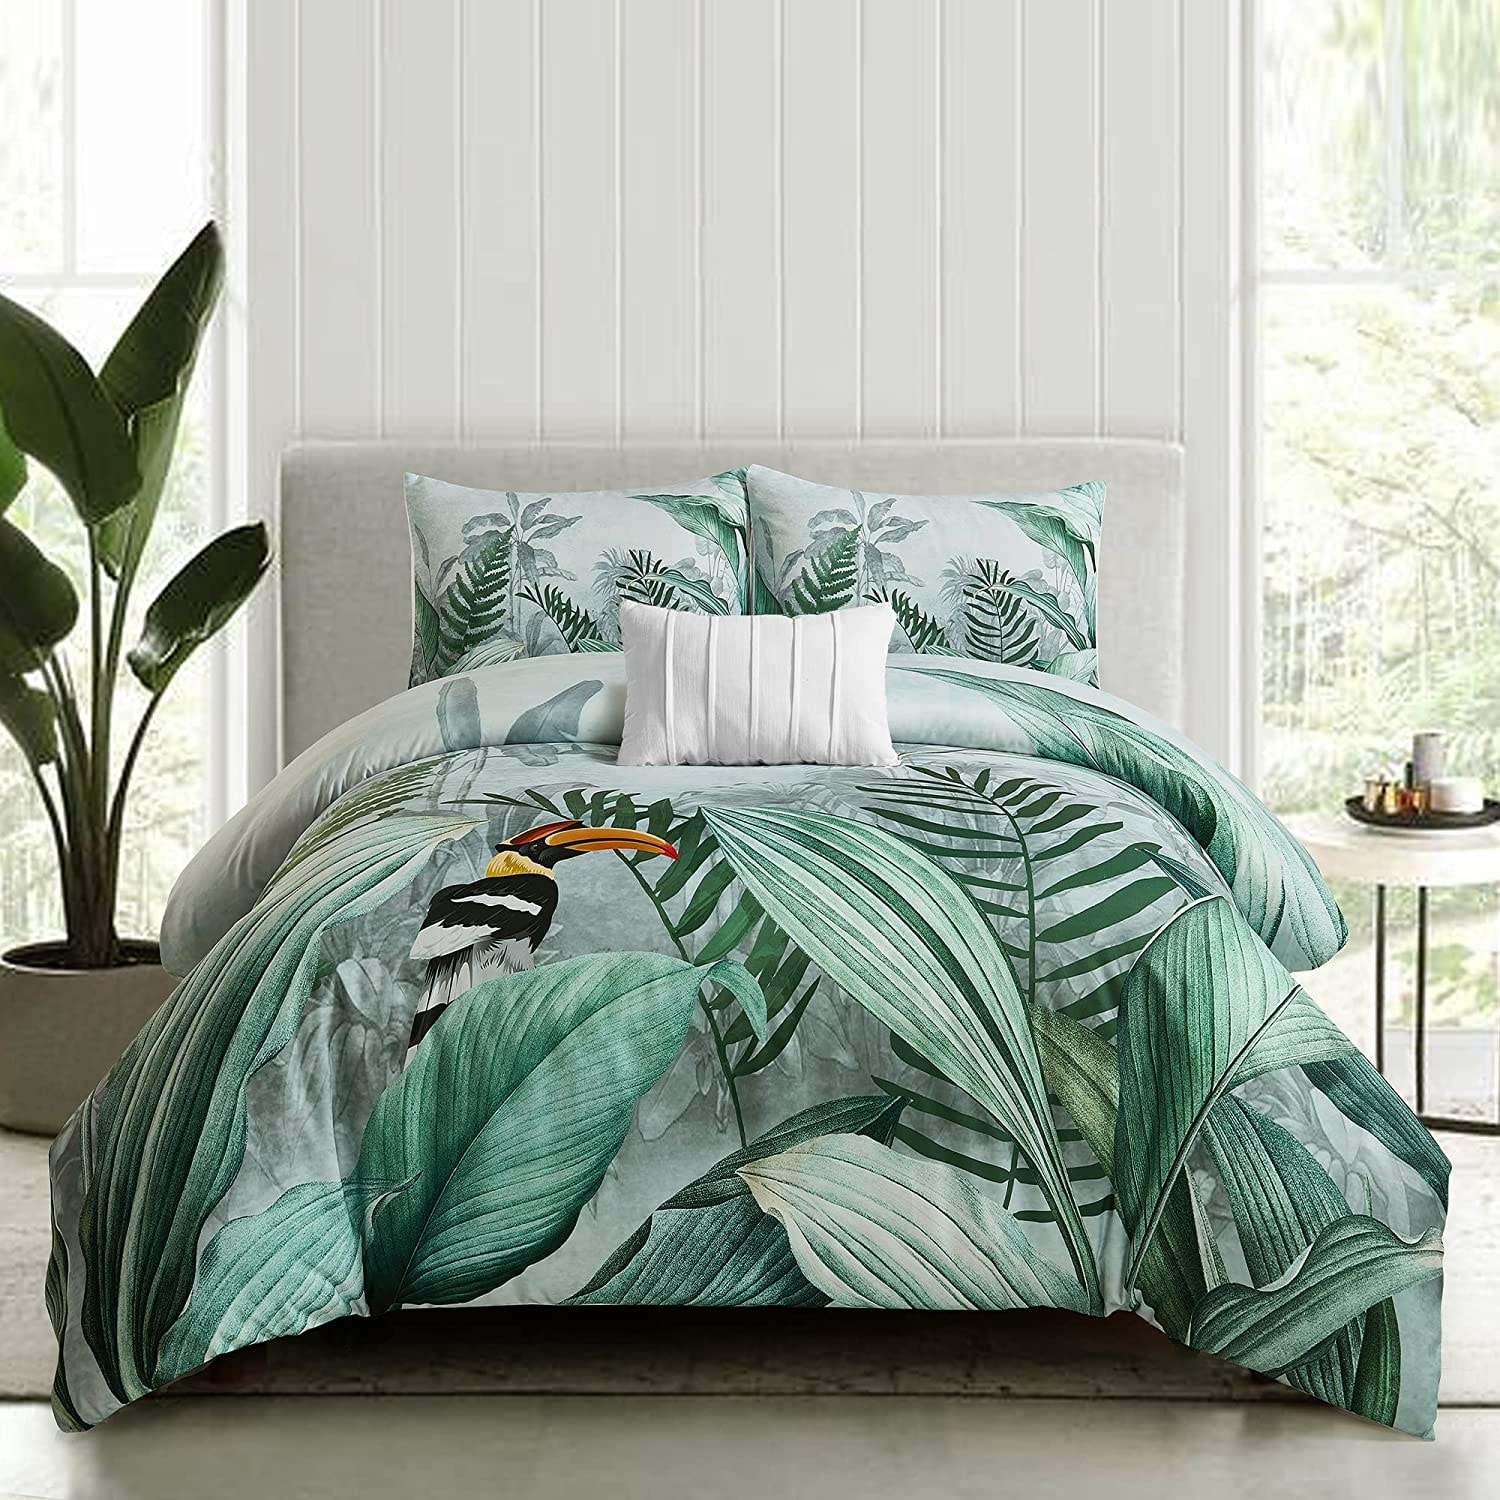 Bird Comforters and Sets - Bed Bath & Beyond